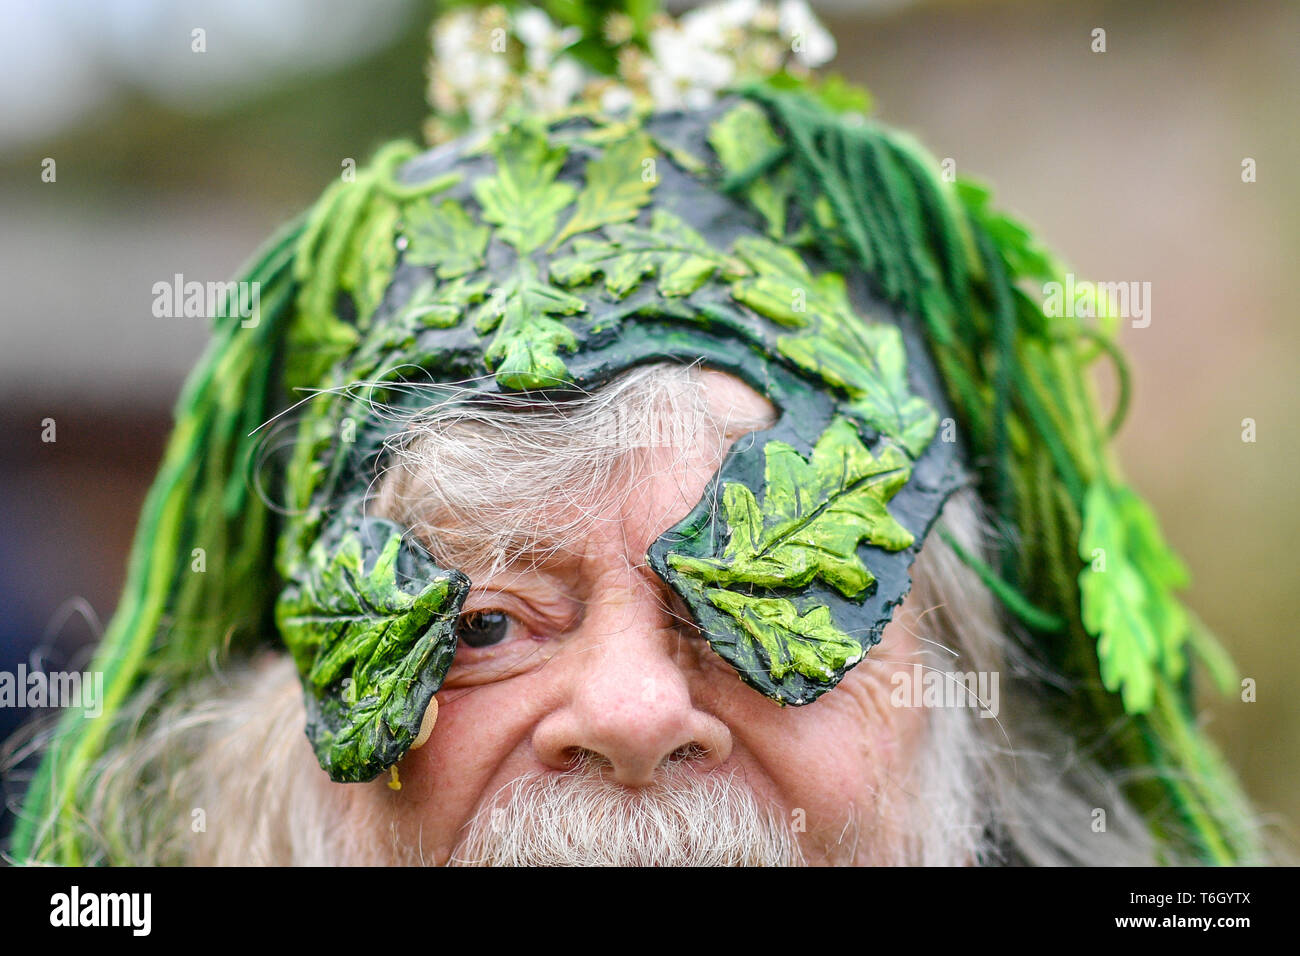 Green Man Tony Arihanto wears his traditional woodland head dress during the Beltane celebrations at Glastonbury Chalice Well, where people gather to observe a modern interpretation of the ancient Celtic pagan fertility rite of Spring. Stock Photo